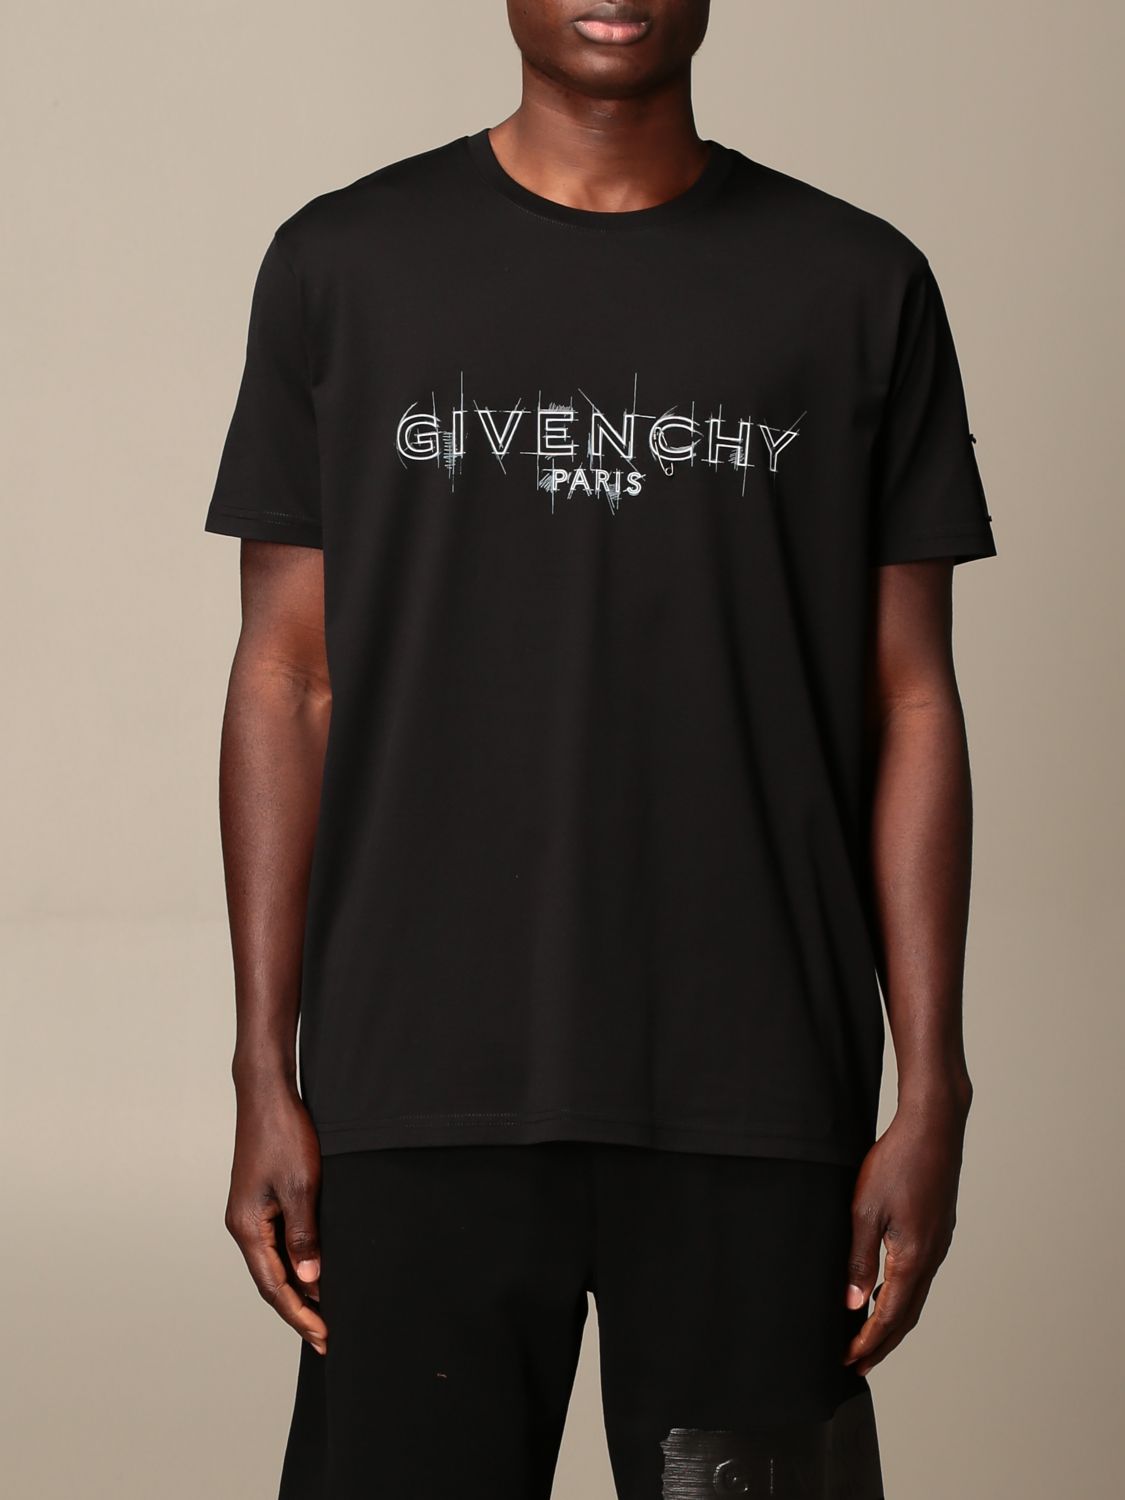 GIVENCHY Outlet: T-shirt with logo - Black | GIVENCHY t-shirt ...